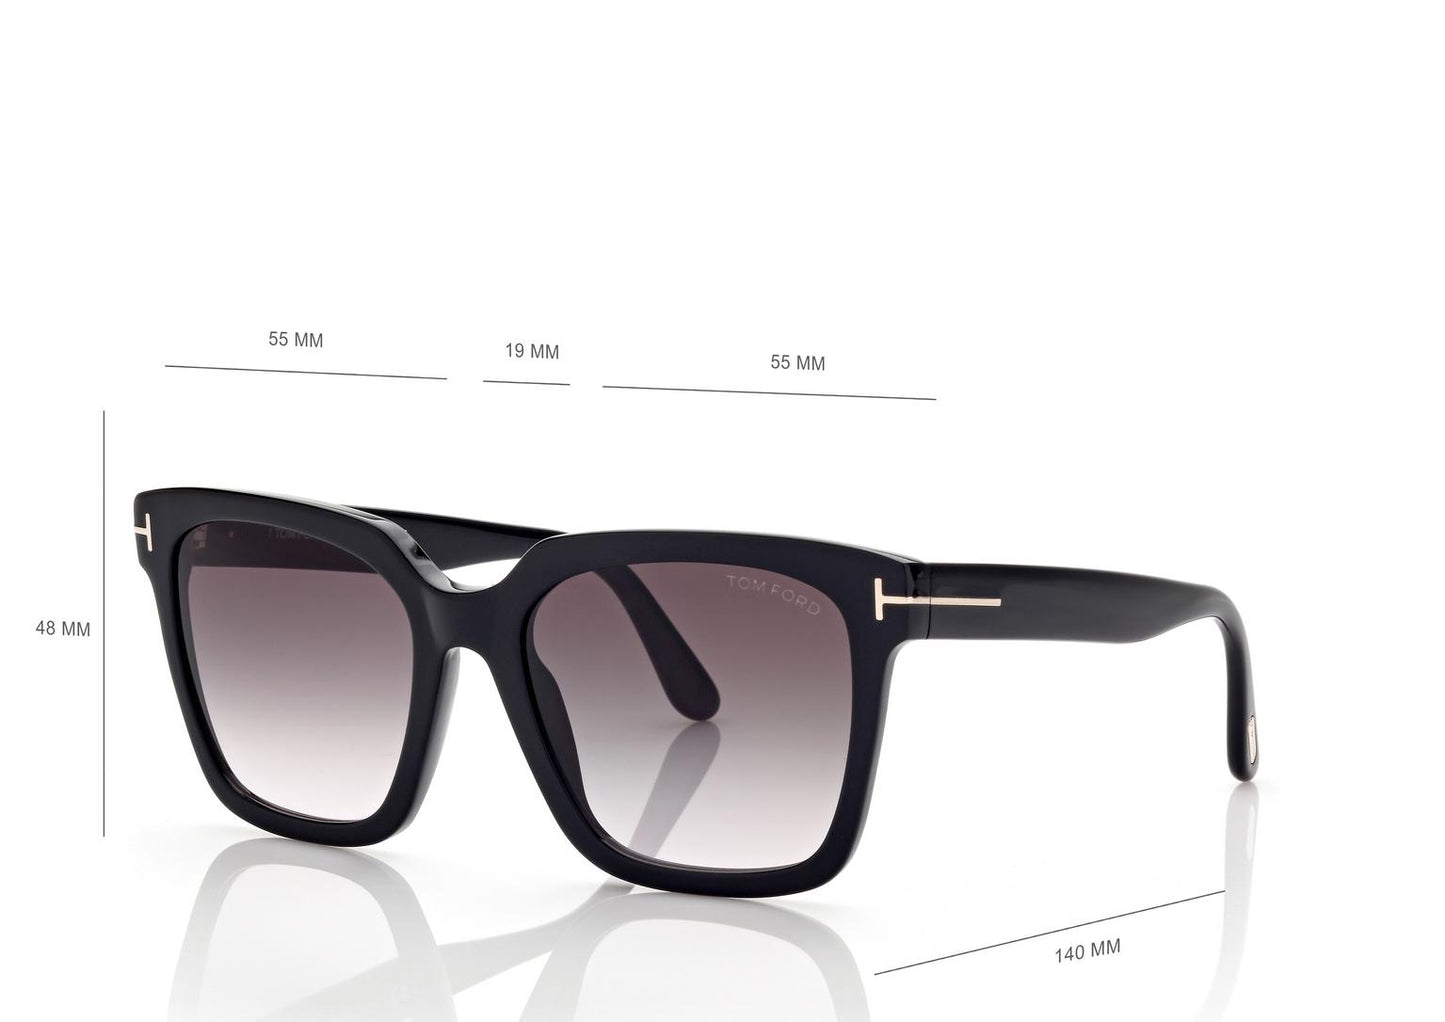 Tom Ford SELBY SUNGLASSES